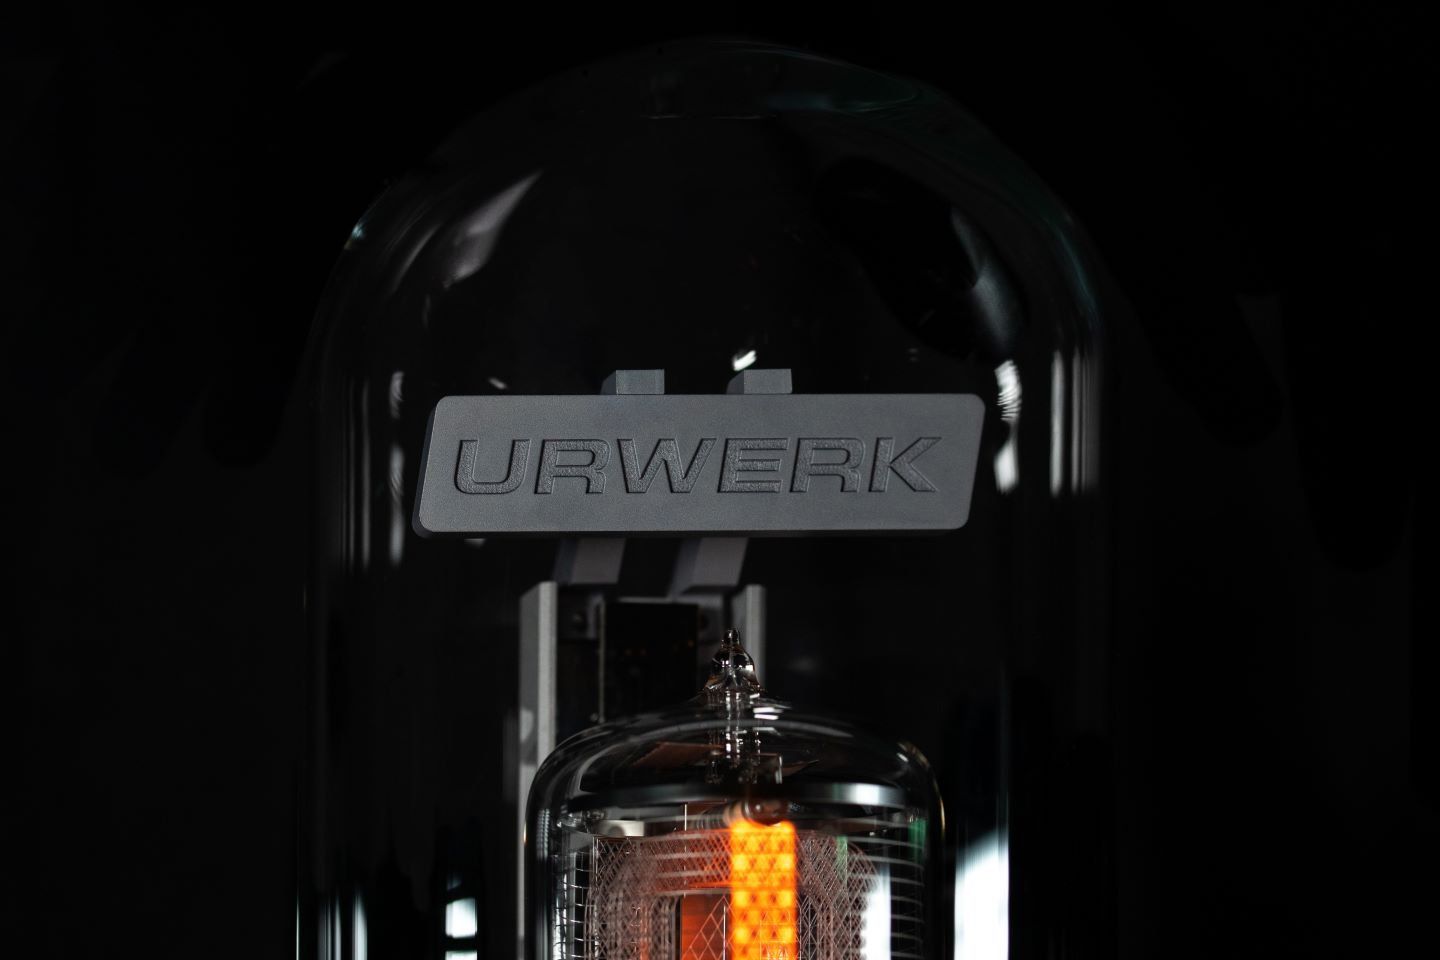 Nixie tubes, which were first used to show numerals using glow discharge in the 1950s, sits at the center.